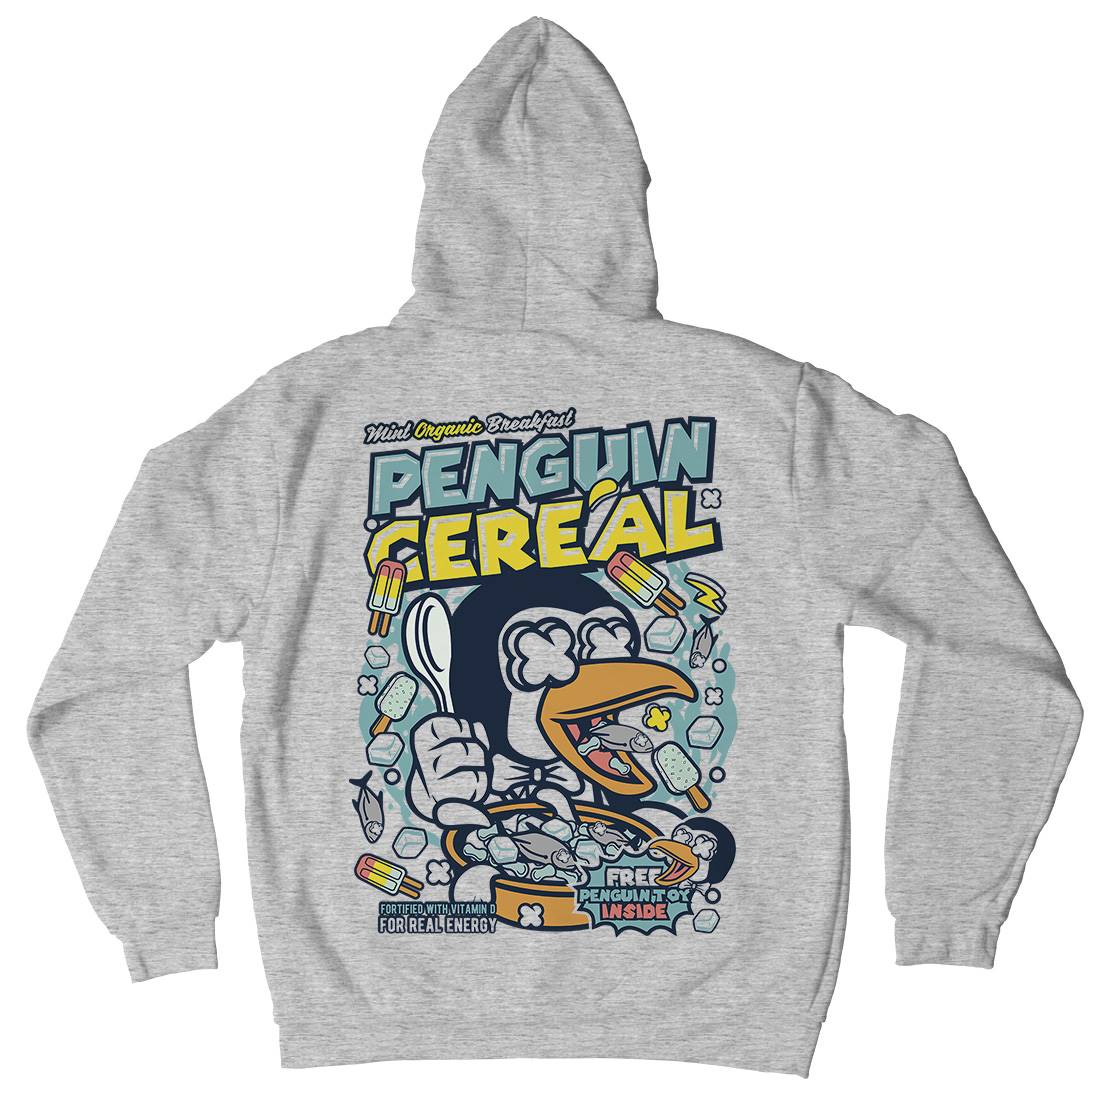 Penguin Cereal Box Mens Hoodie With Pocket Food C602